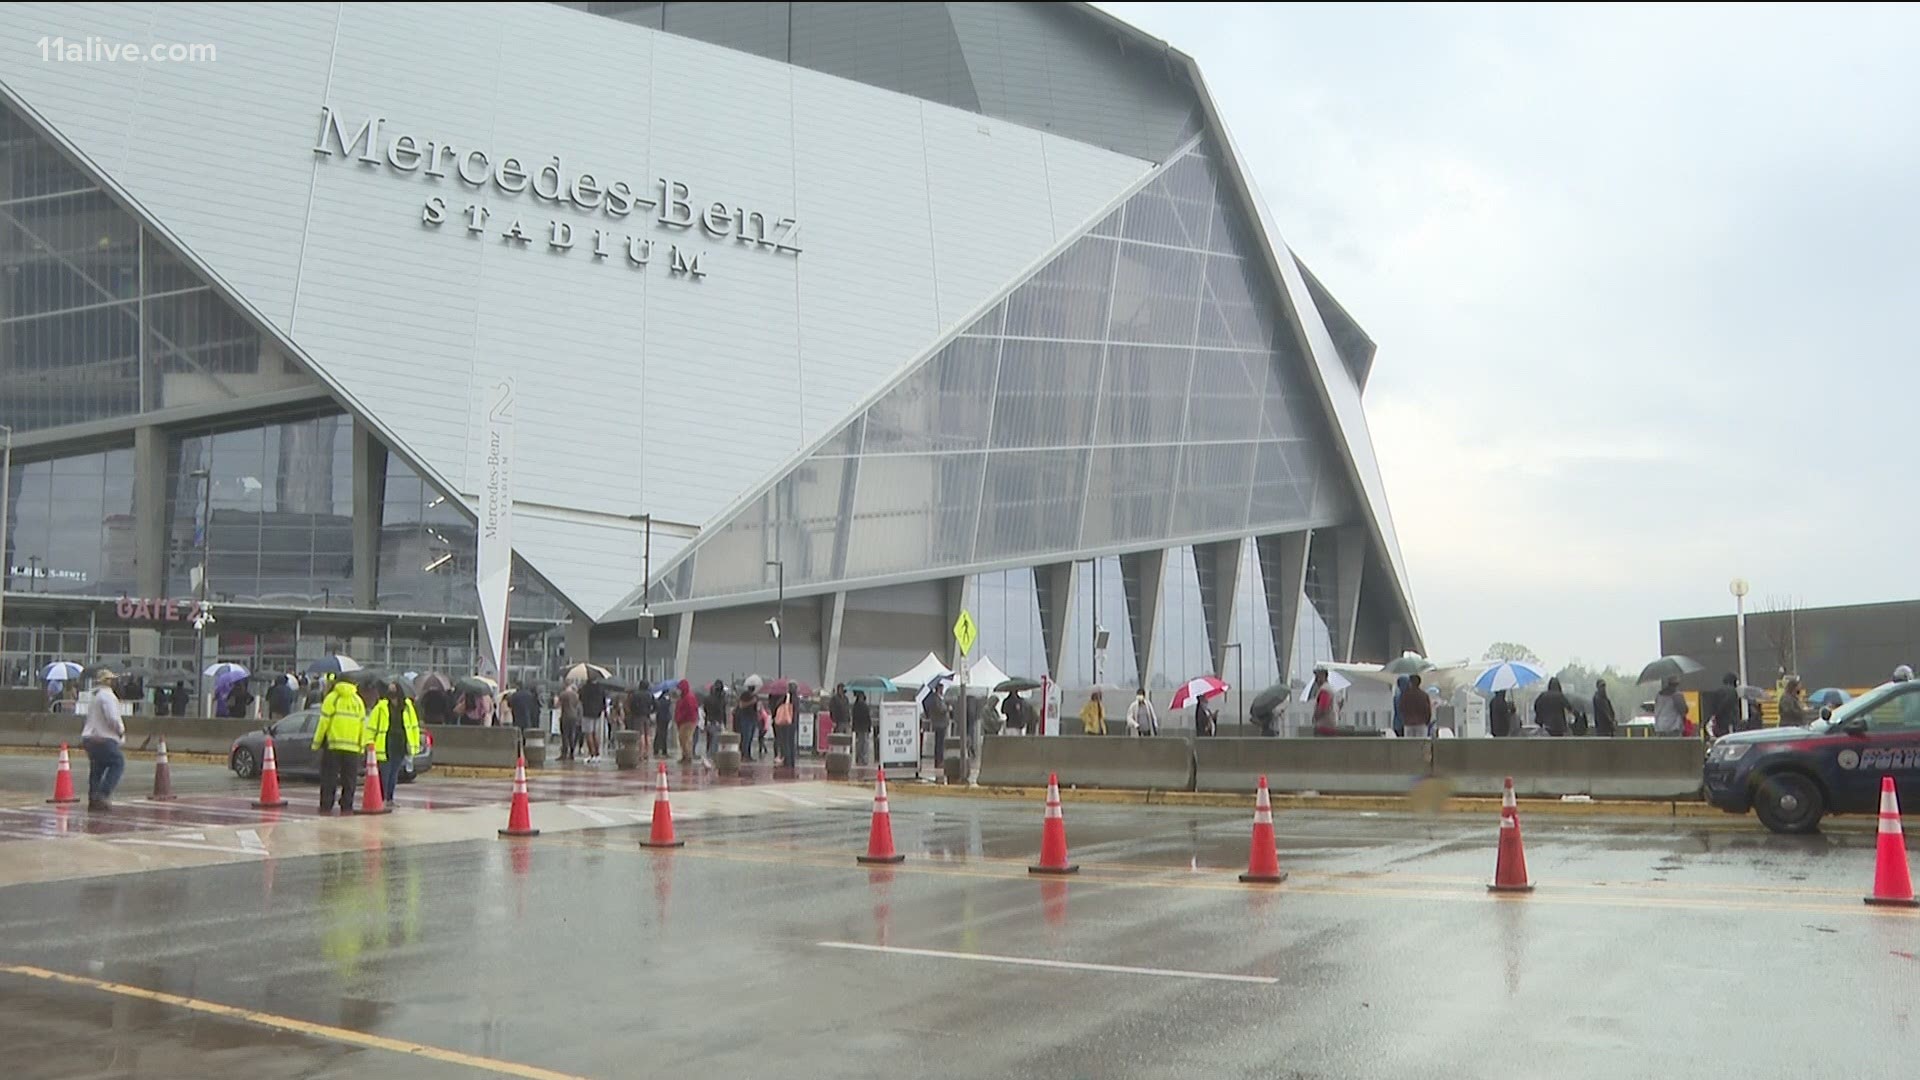 One of the largest sites is at Mercedes-Benz Stadium